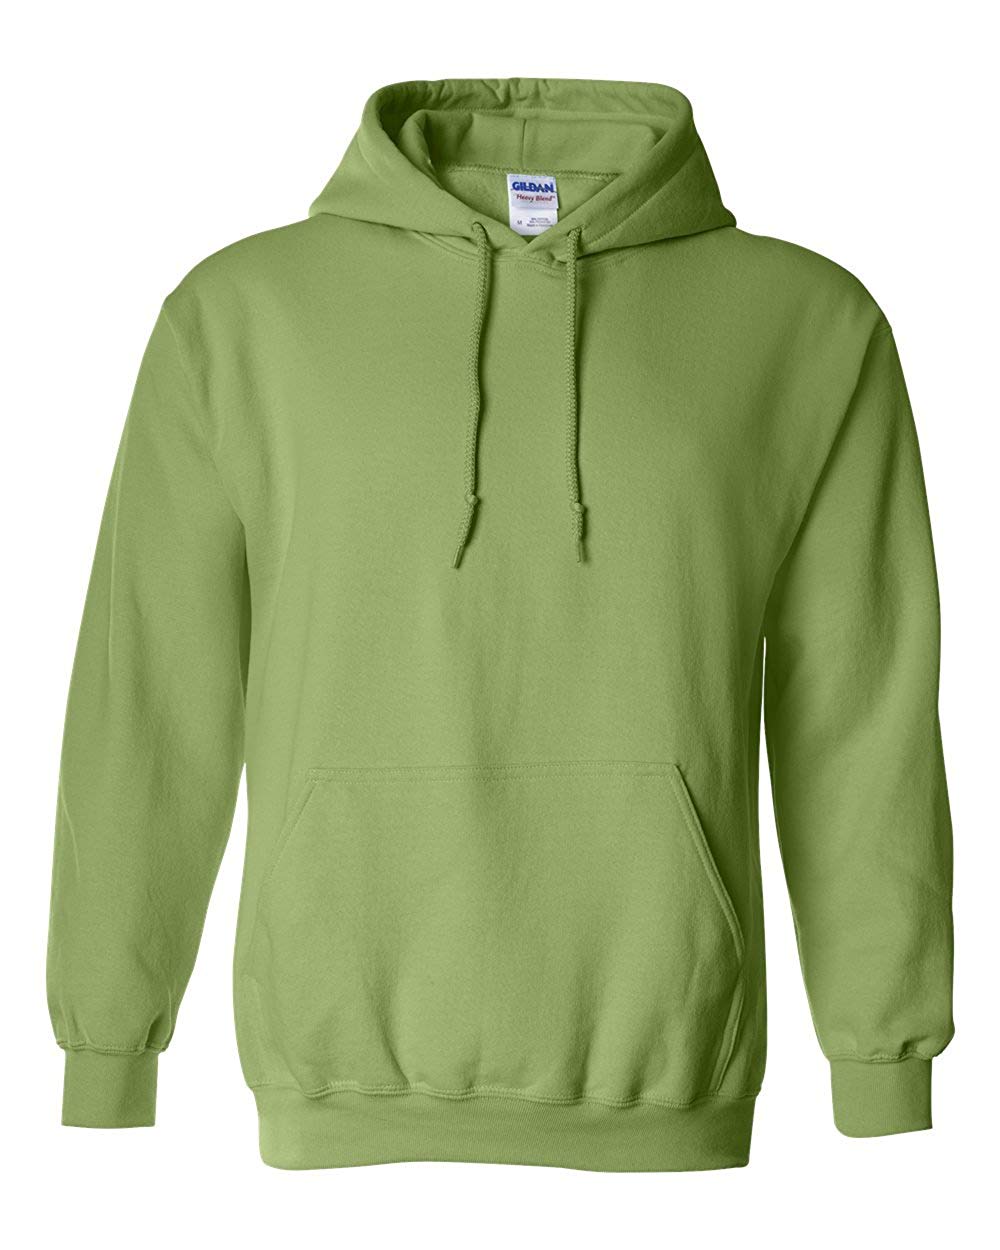 terry pounds gildan heavy blend adult hooded sweatshirt at amazon mens clothing store athletic